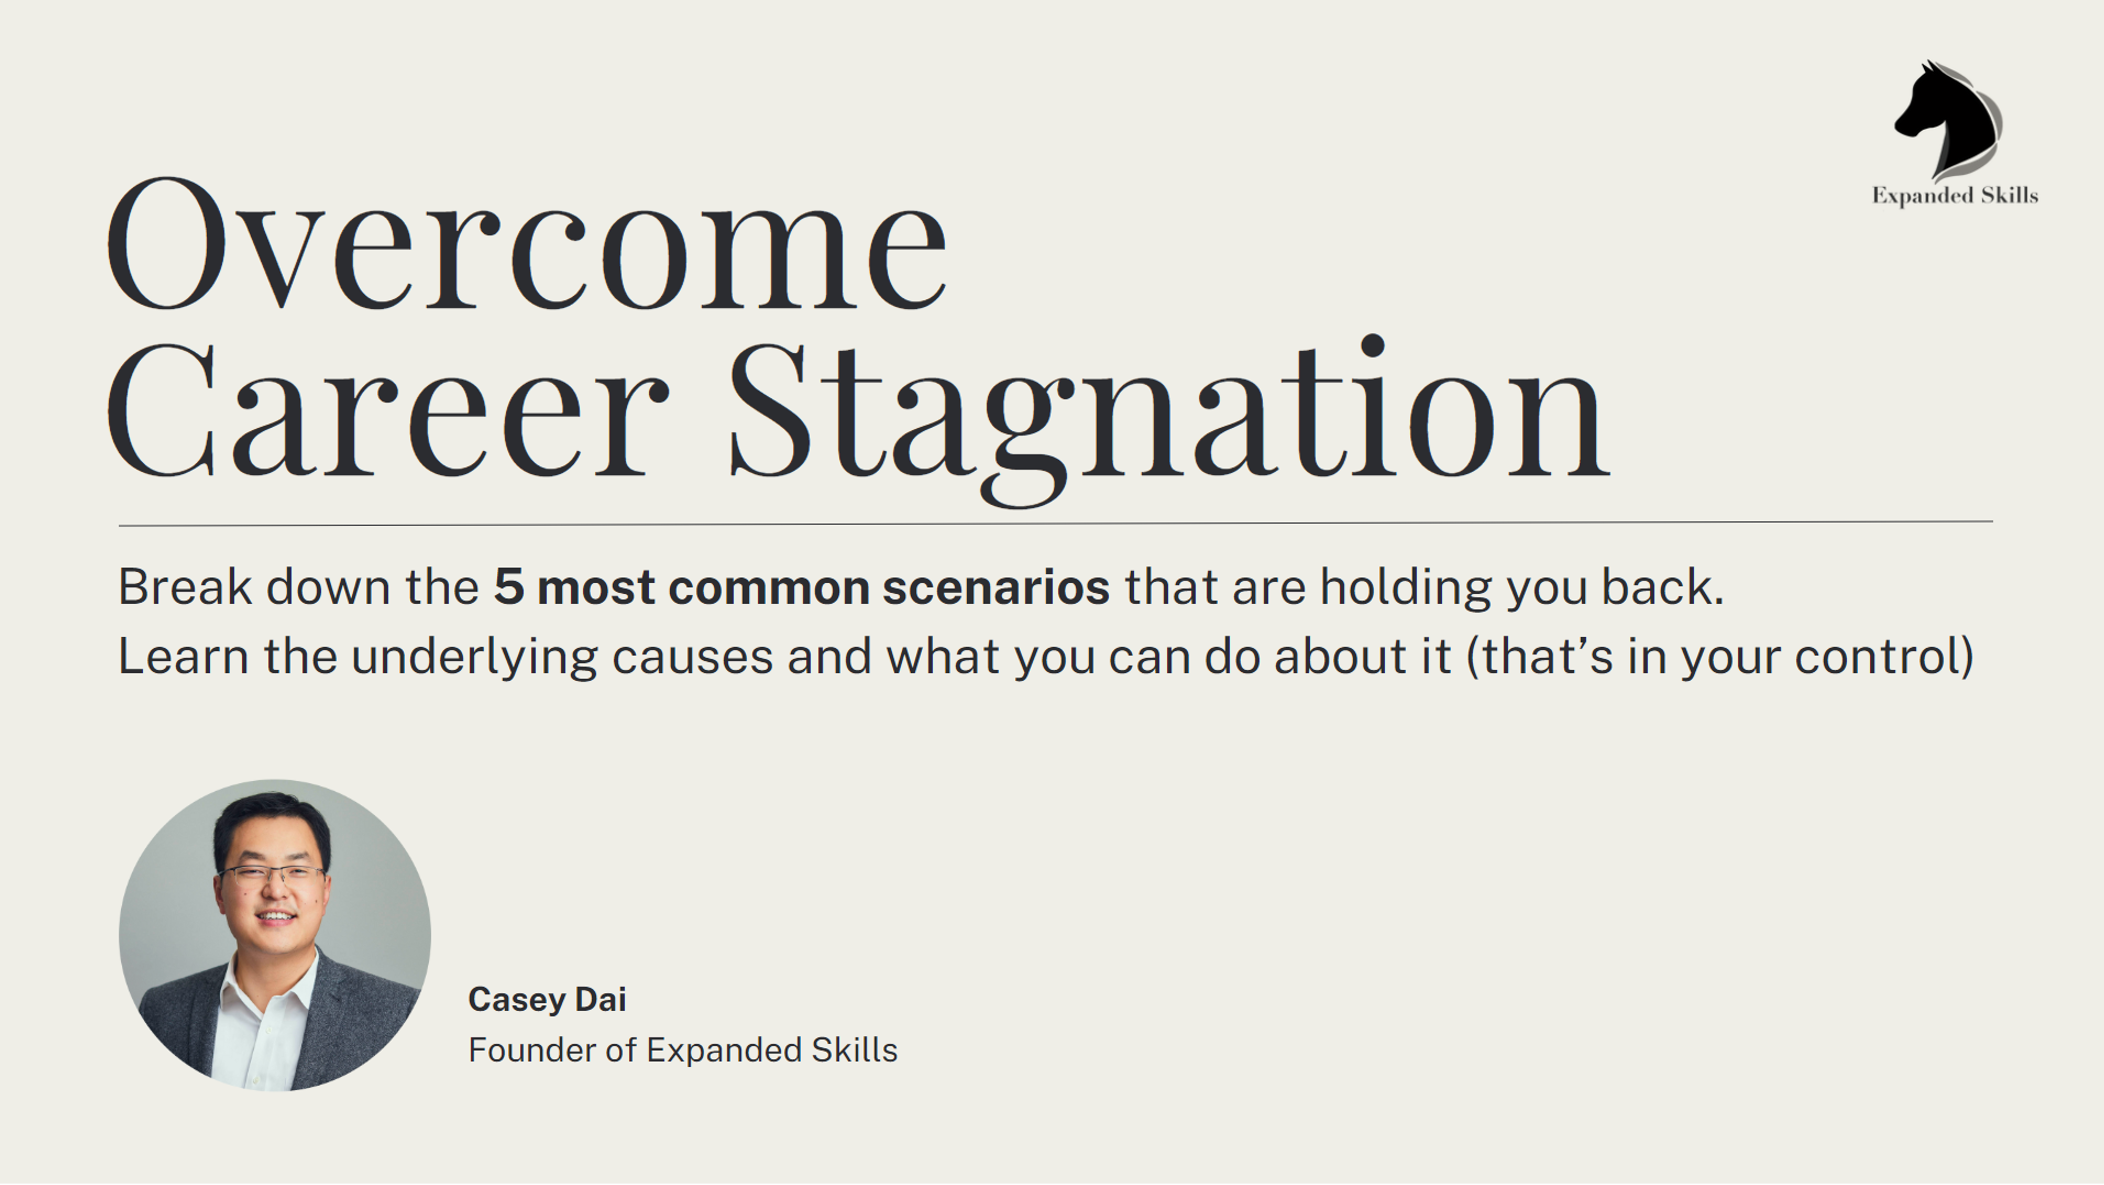 Overcome Career Stagnation event